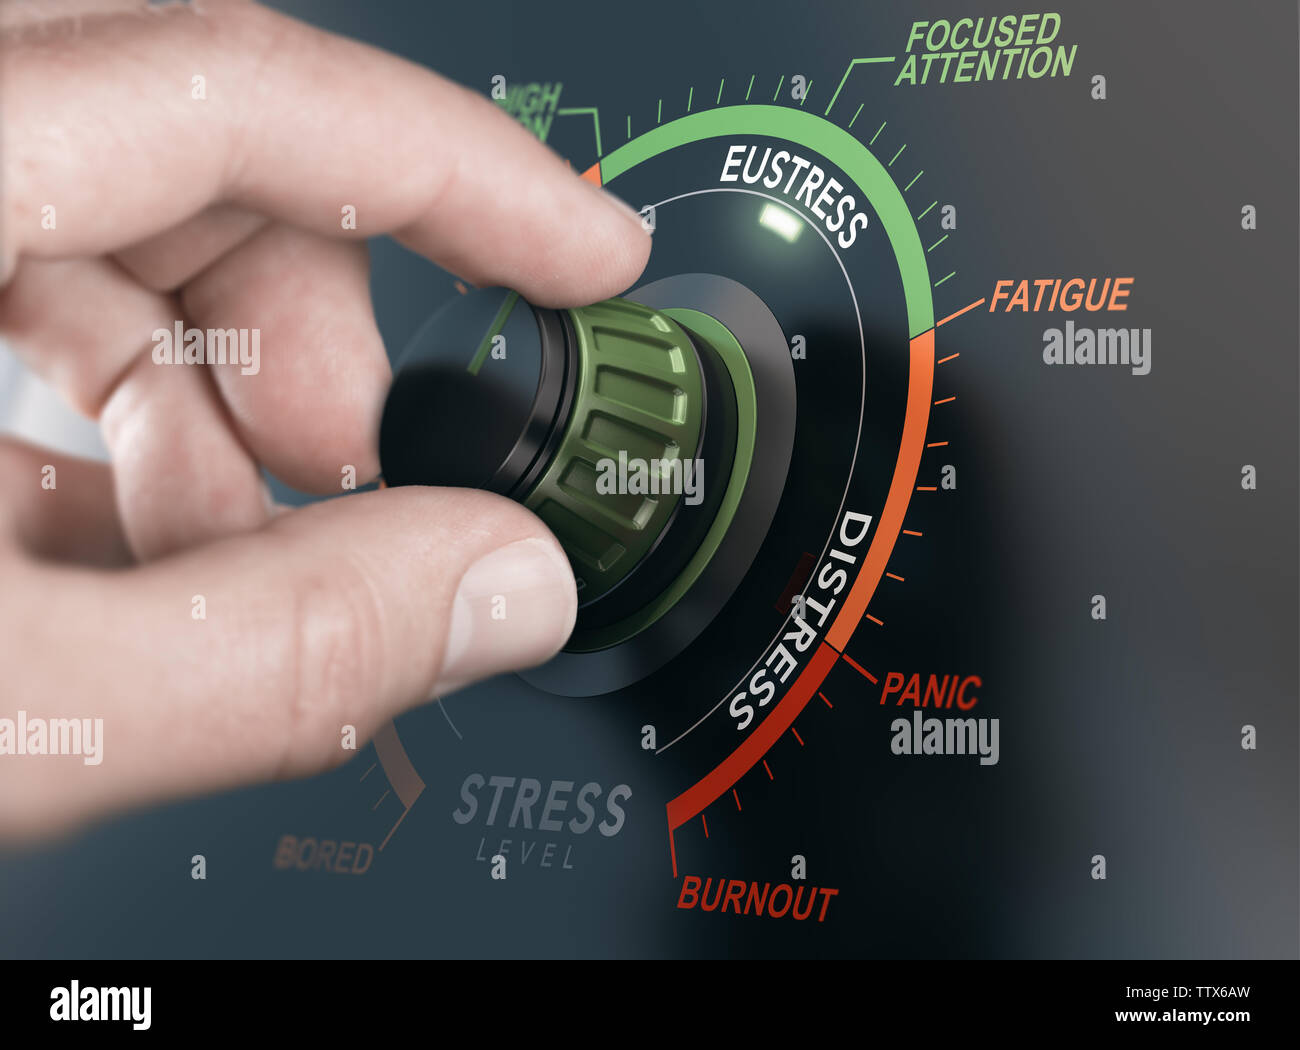 Hand turning a switch to manage stress level and setting it to eustress instead of distress. Composite between a photography and a 3D background. Stock Photo